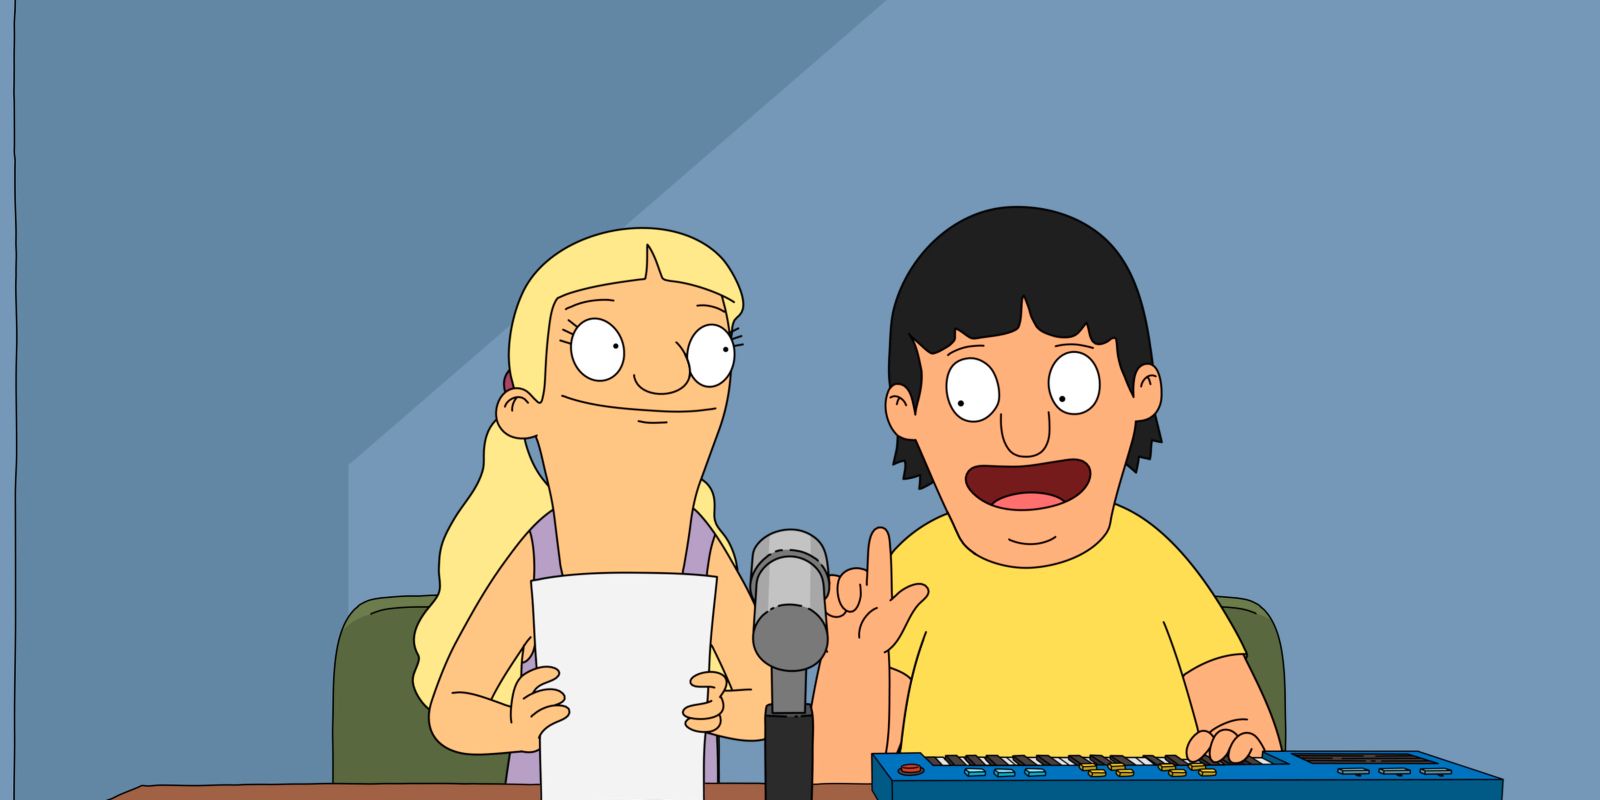 Gene and Courtney sitting together in Bob's Burgers